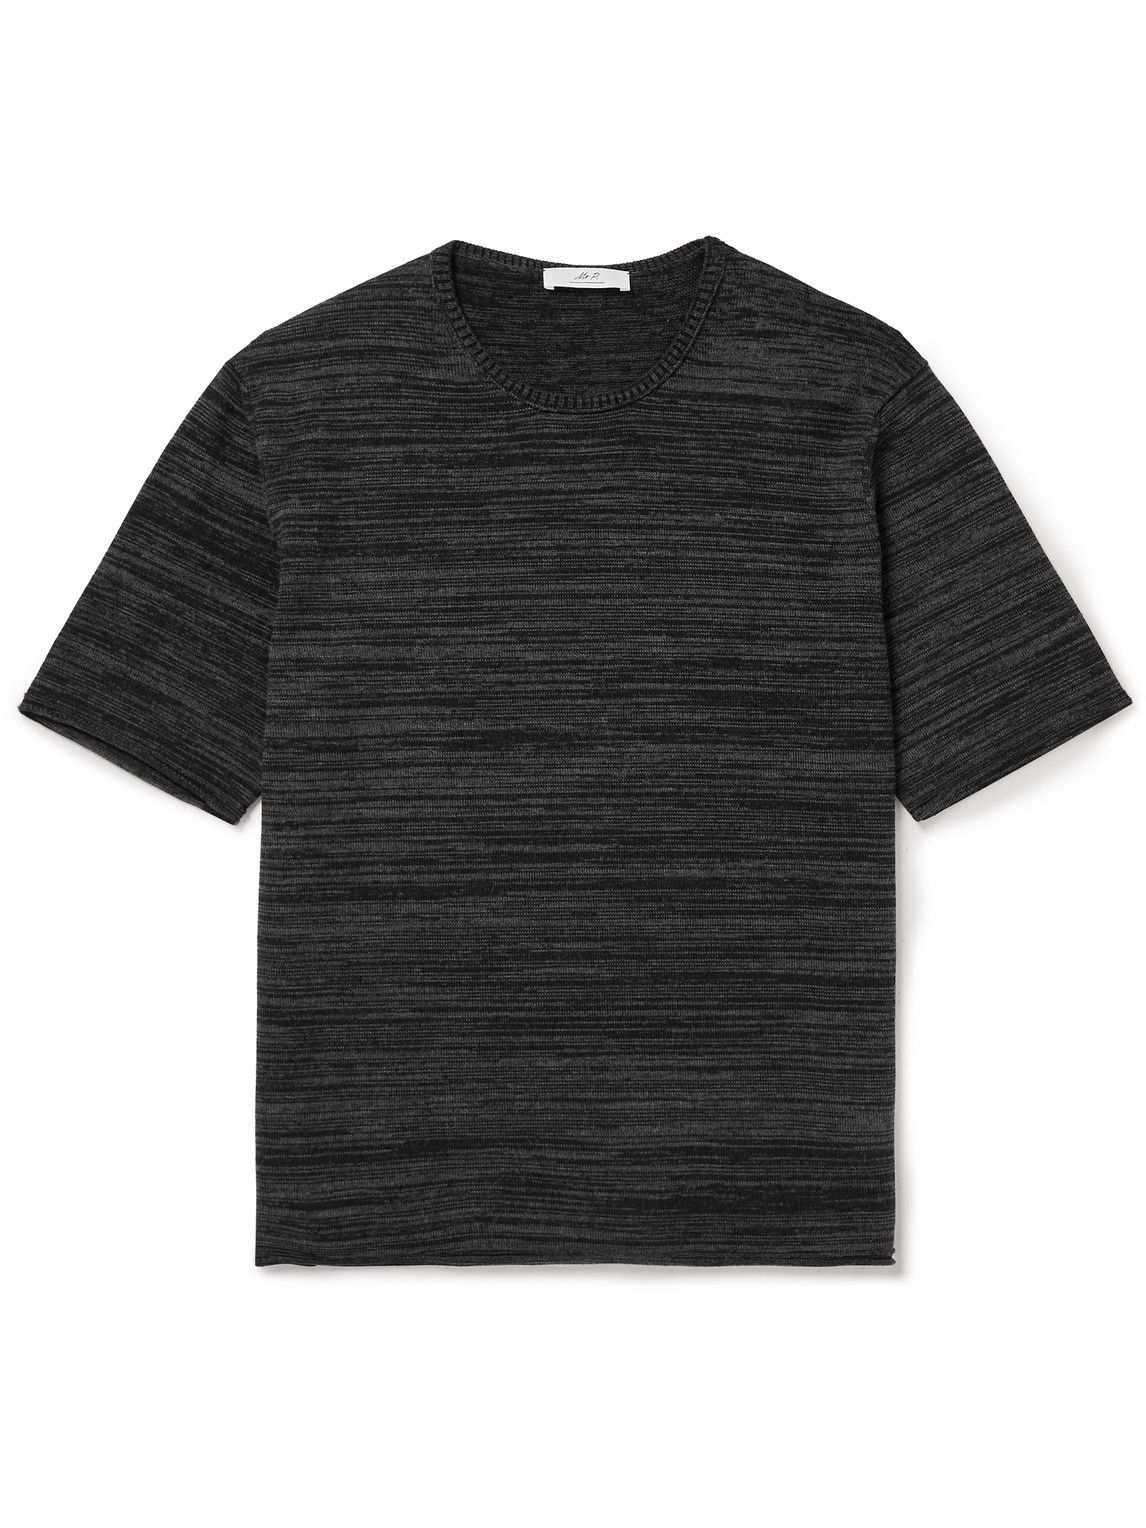 Mr P. - Knitted Organic Cotton and Wool-Blend T-Shirt - Gray Mr P.